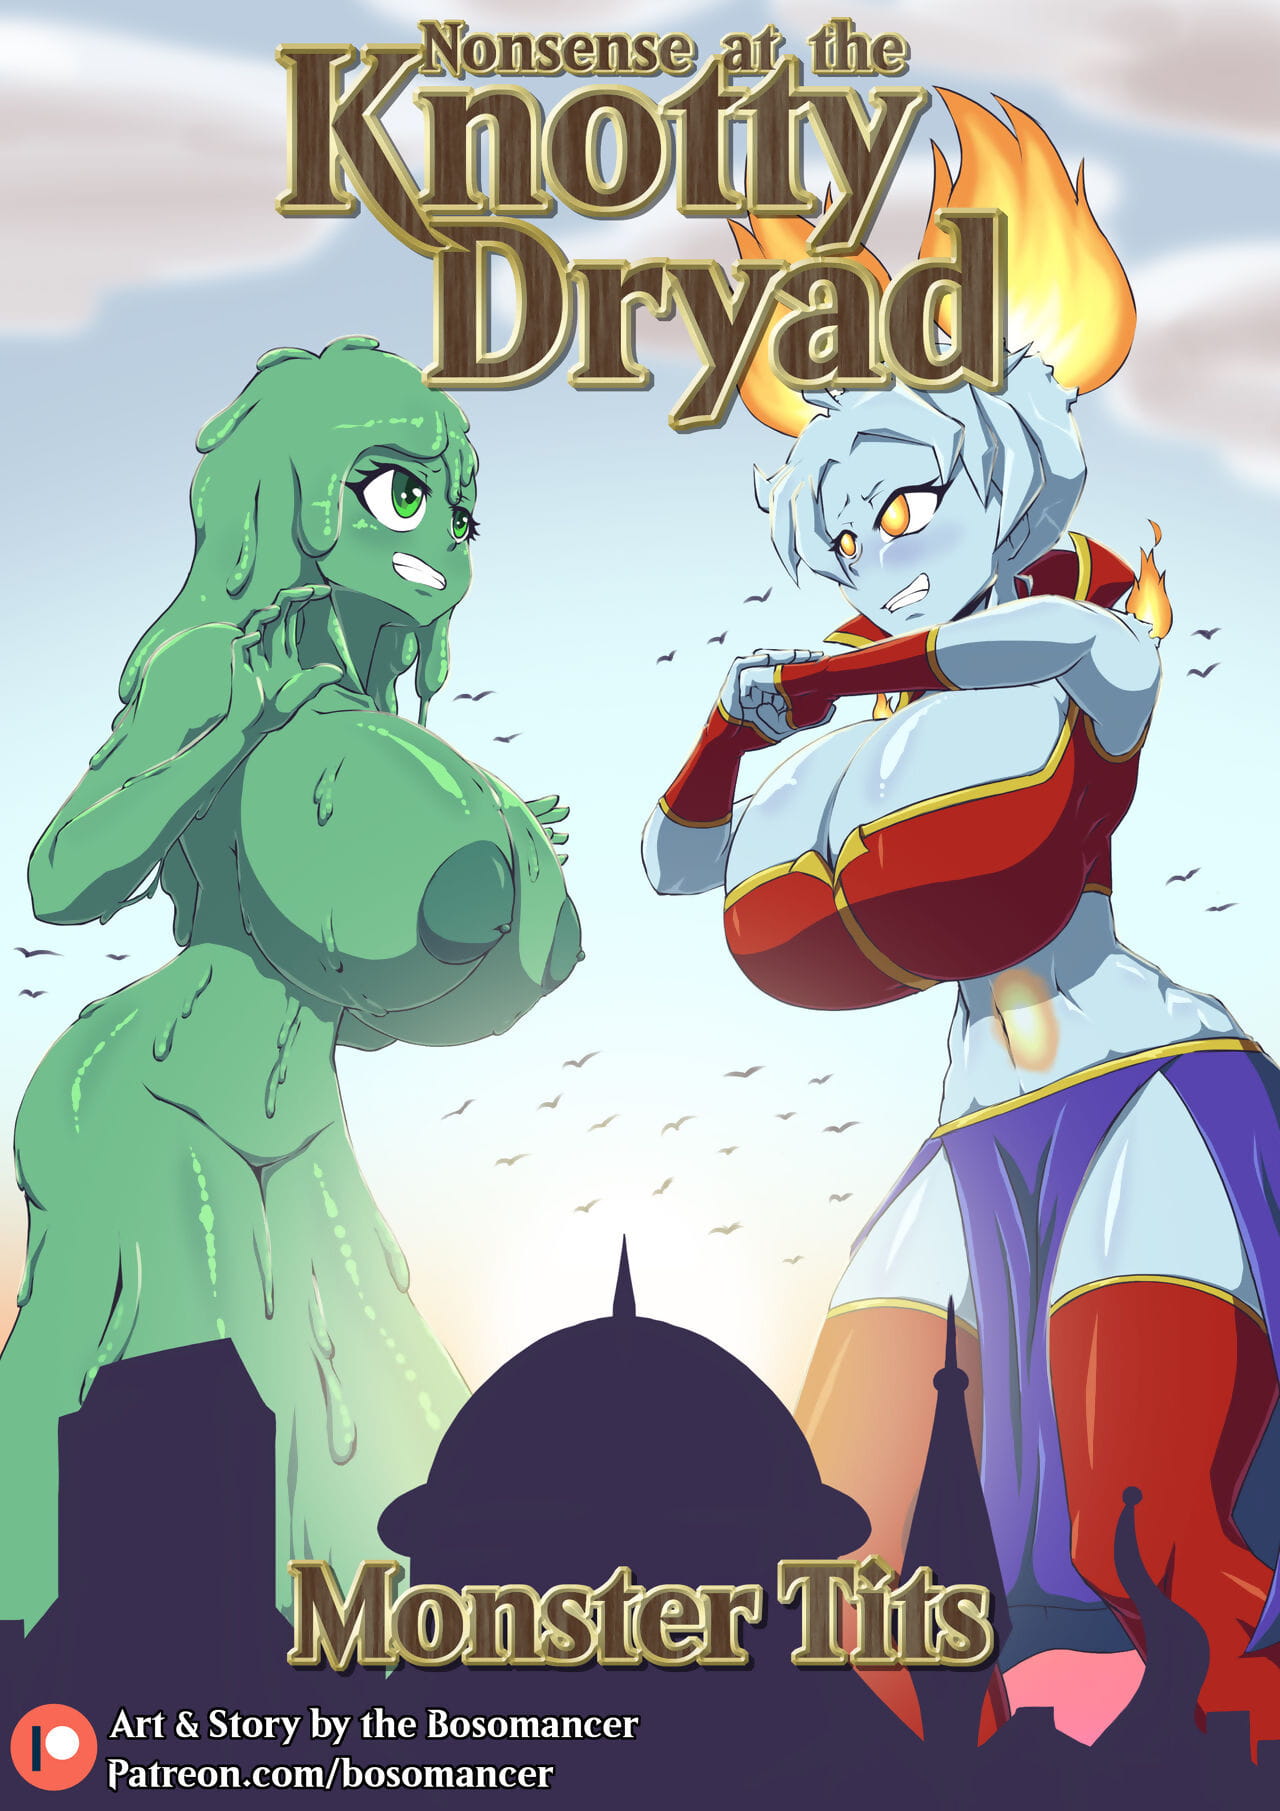 The Knotty Dryad #1 page 1